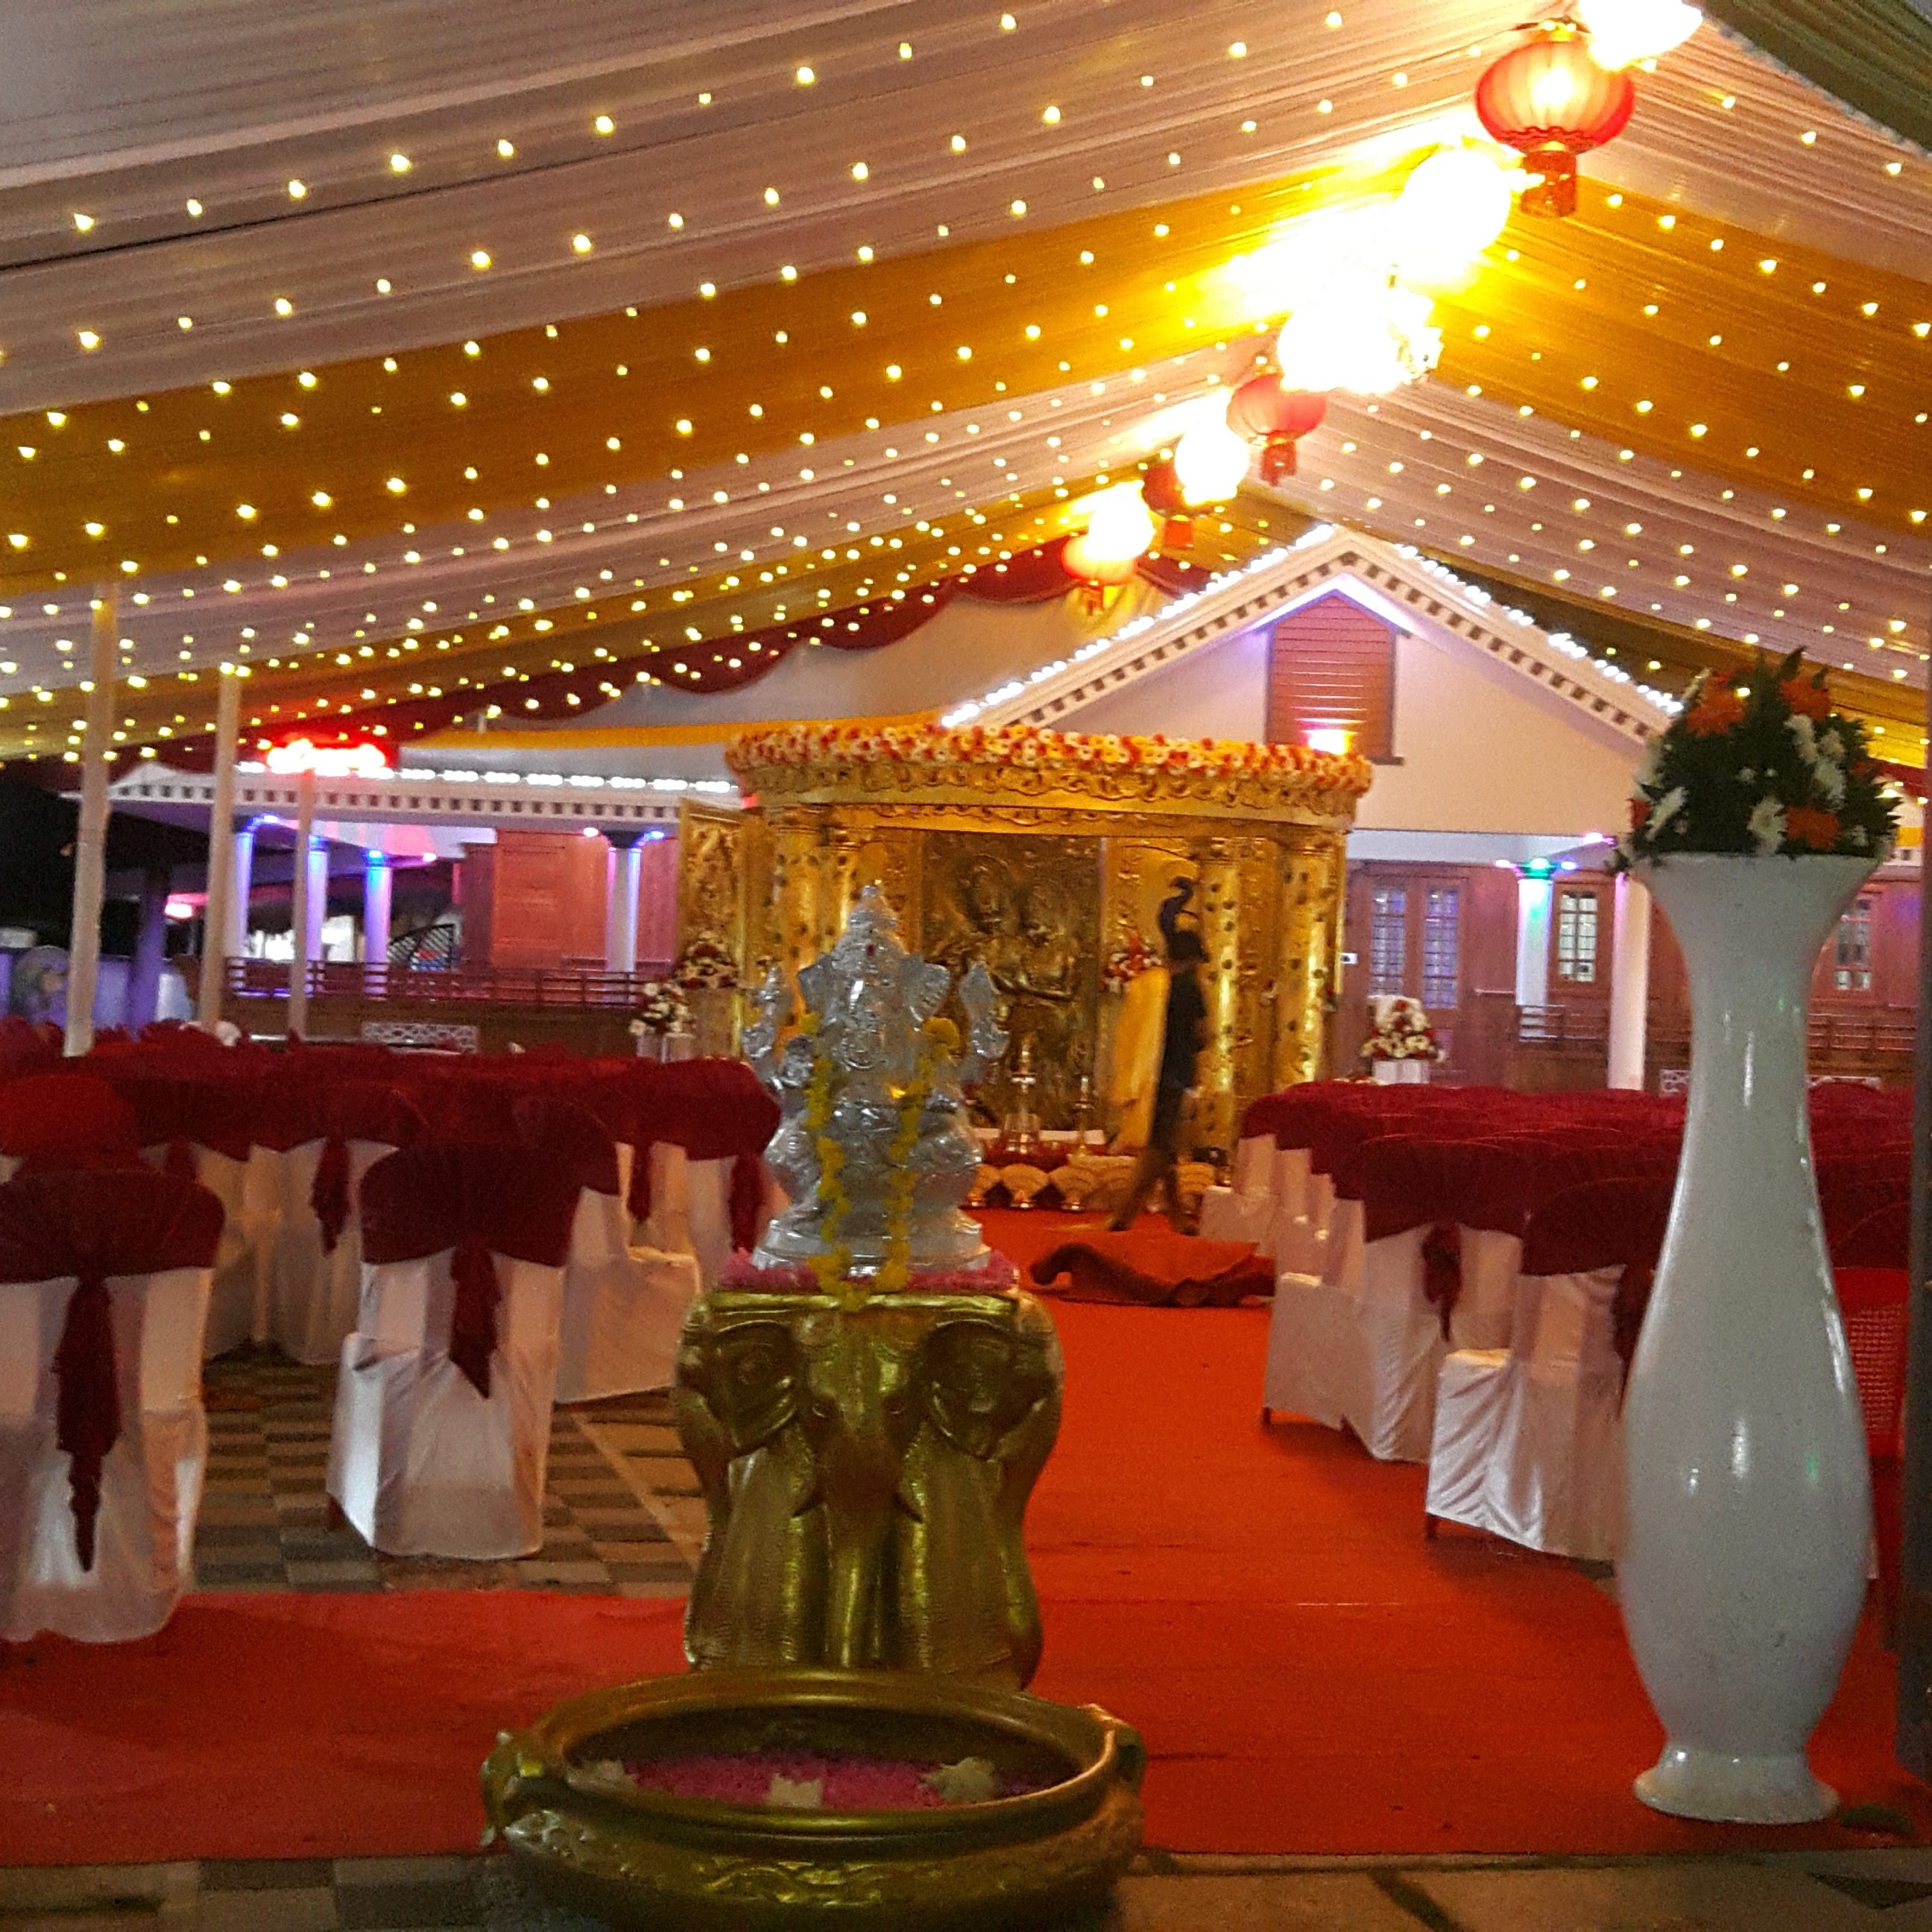 pandhal-works-and-decorations-with-lights-stage-decorations-in-Mavelikkara-Kerala